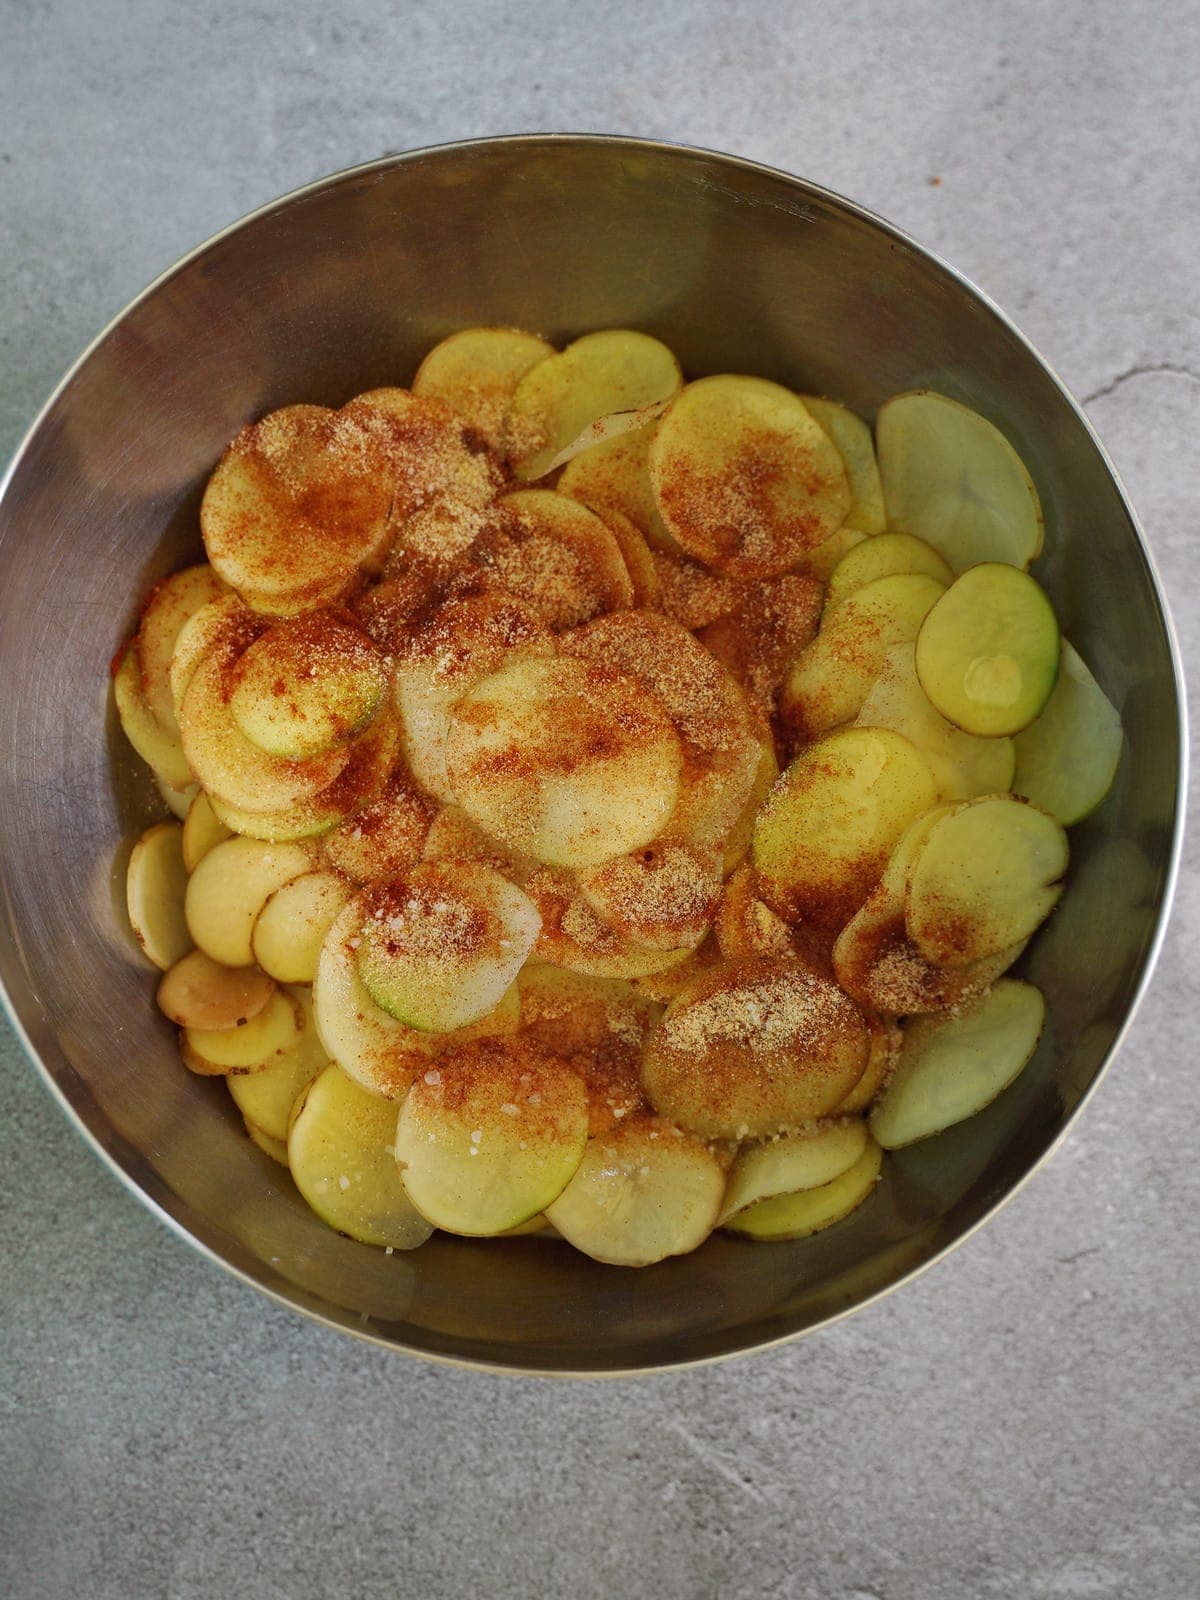 sliced potatoes in bowl with spices